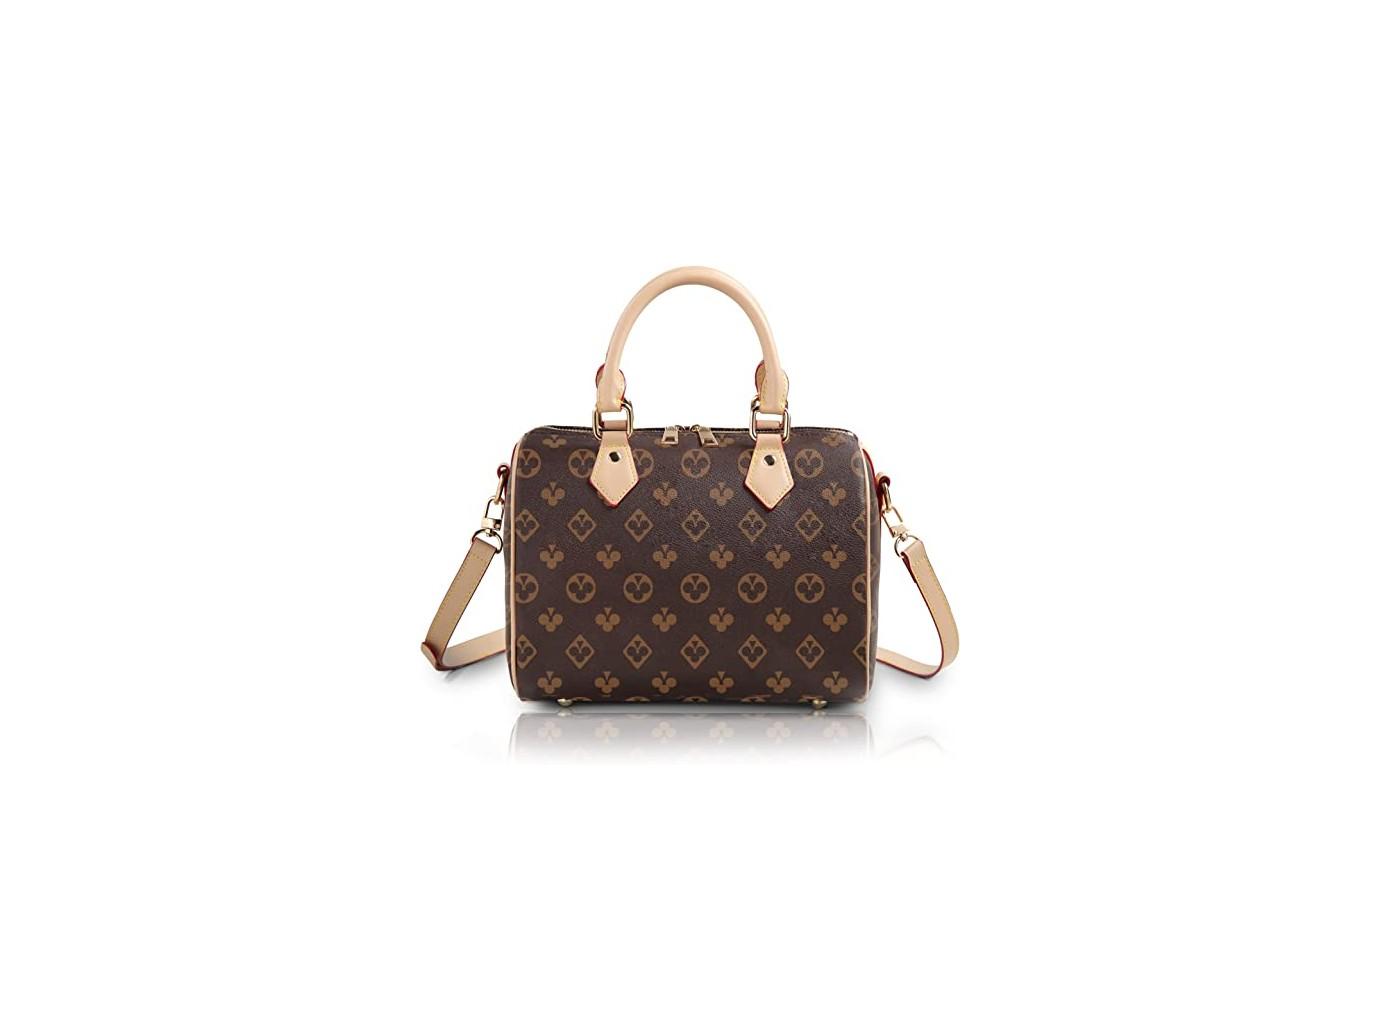 Boohoo Just Dropped The Perfect Louis Vuitton Duplicate